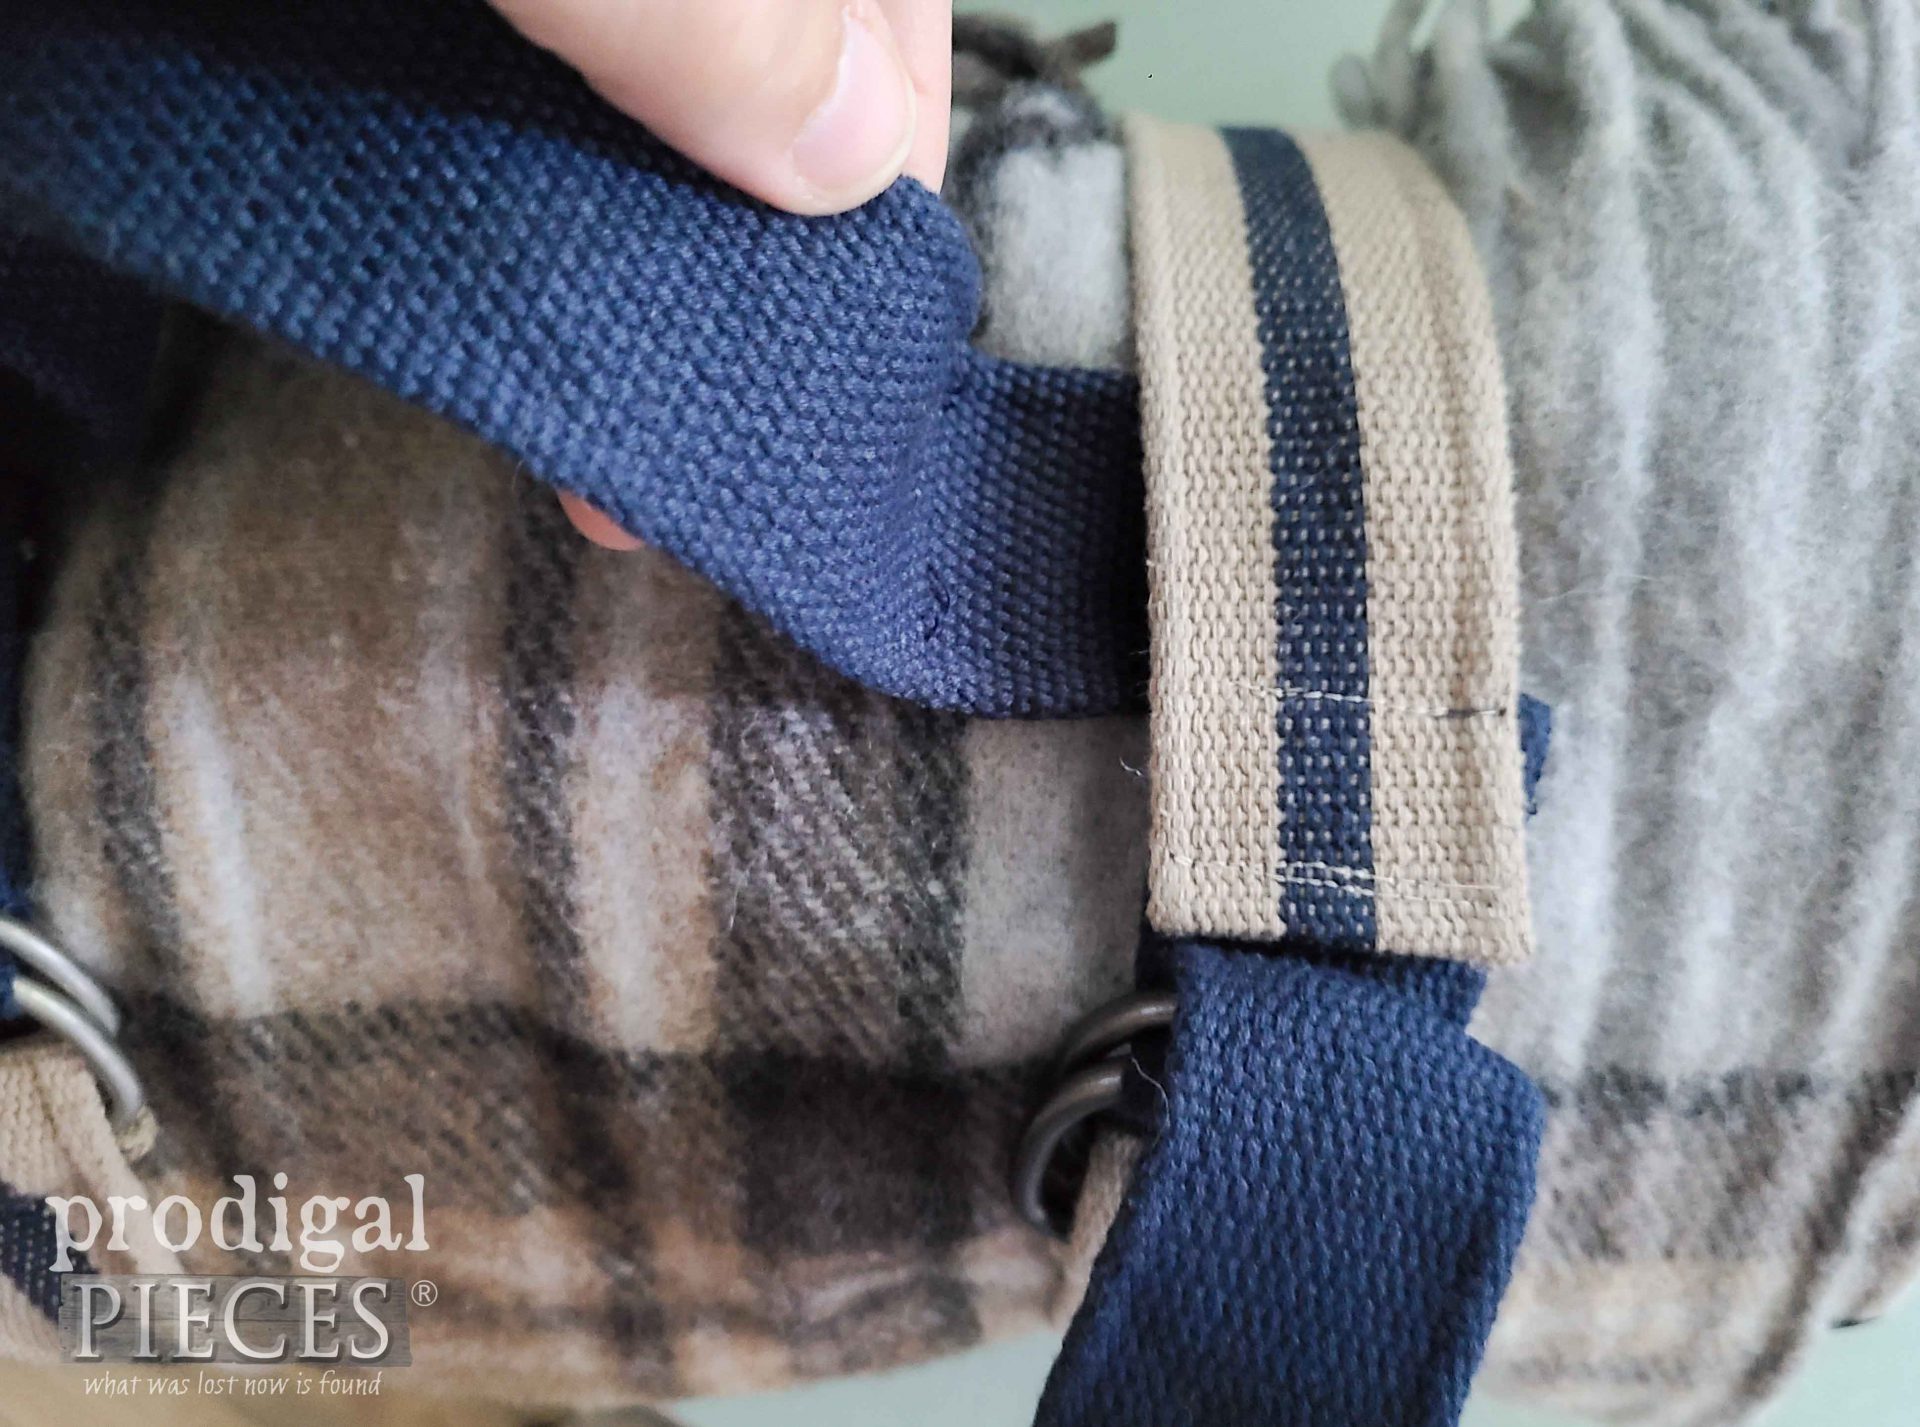 Placement of Carry Strap on DIY Blanket Carrier | prodigalpieces.com #prodigalpieces